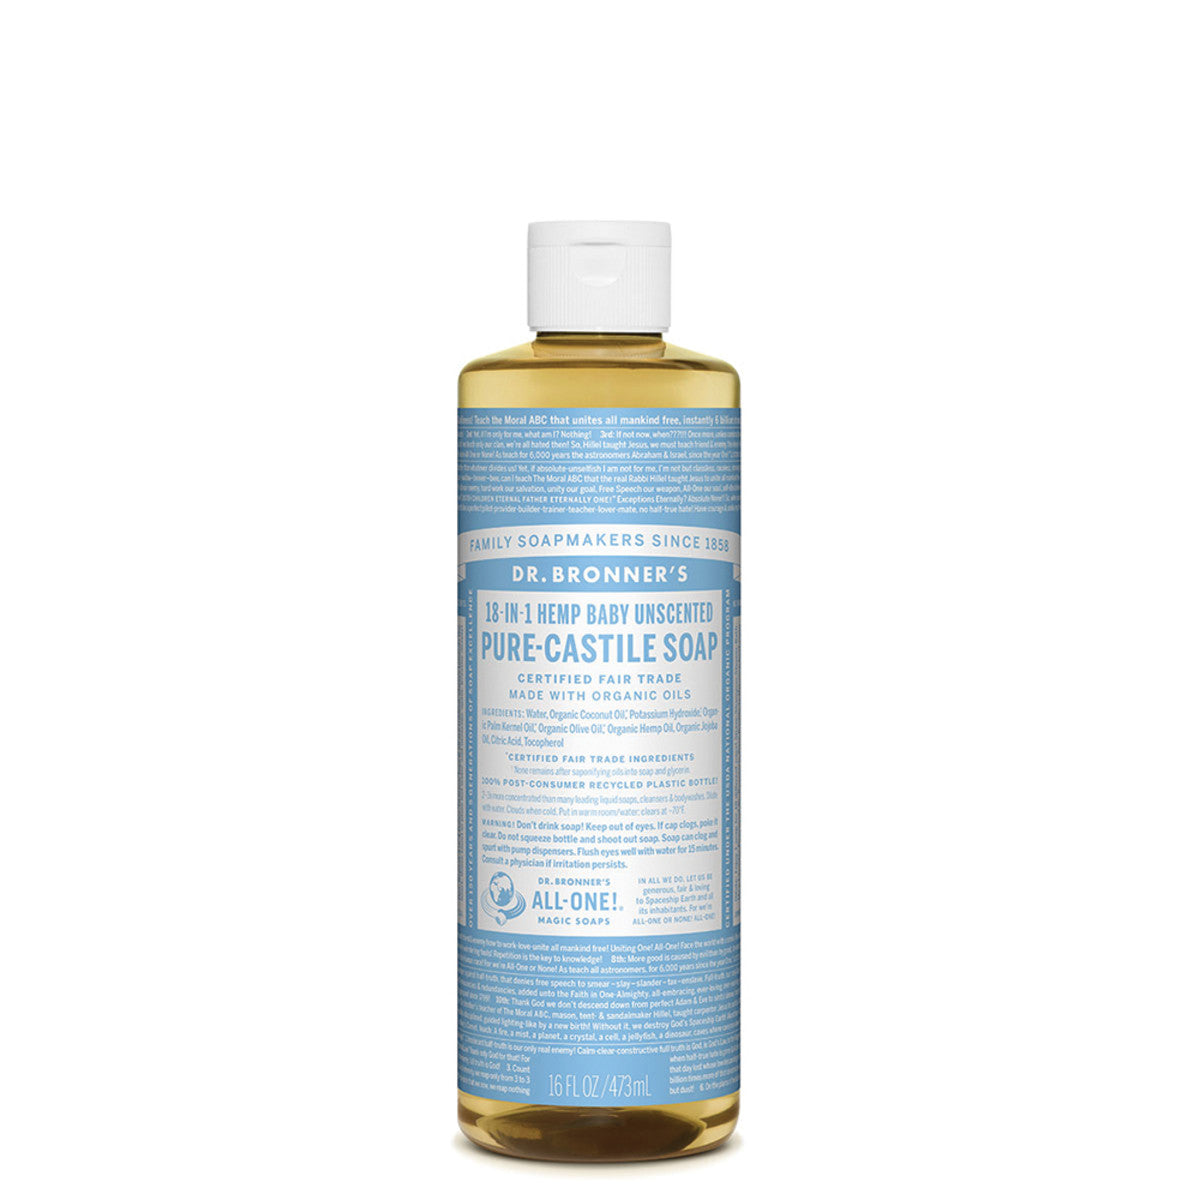 Dr. Bronner's Pure-Castile Soap Liquid (Hemp 18-in-1) Unscented (Baby)